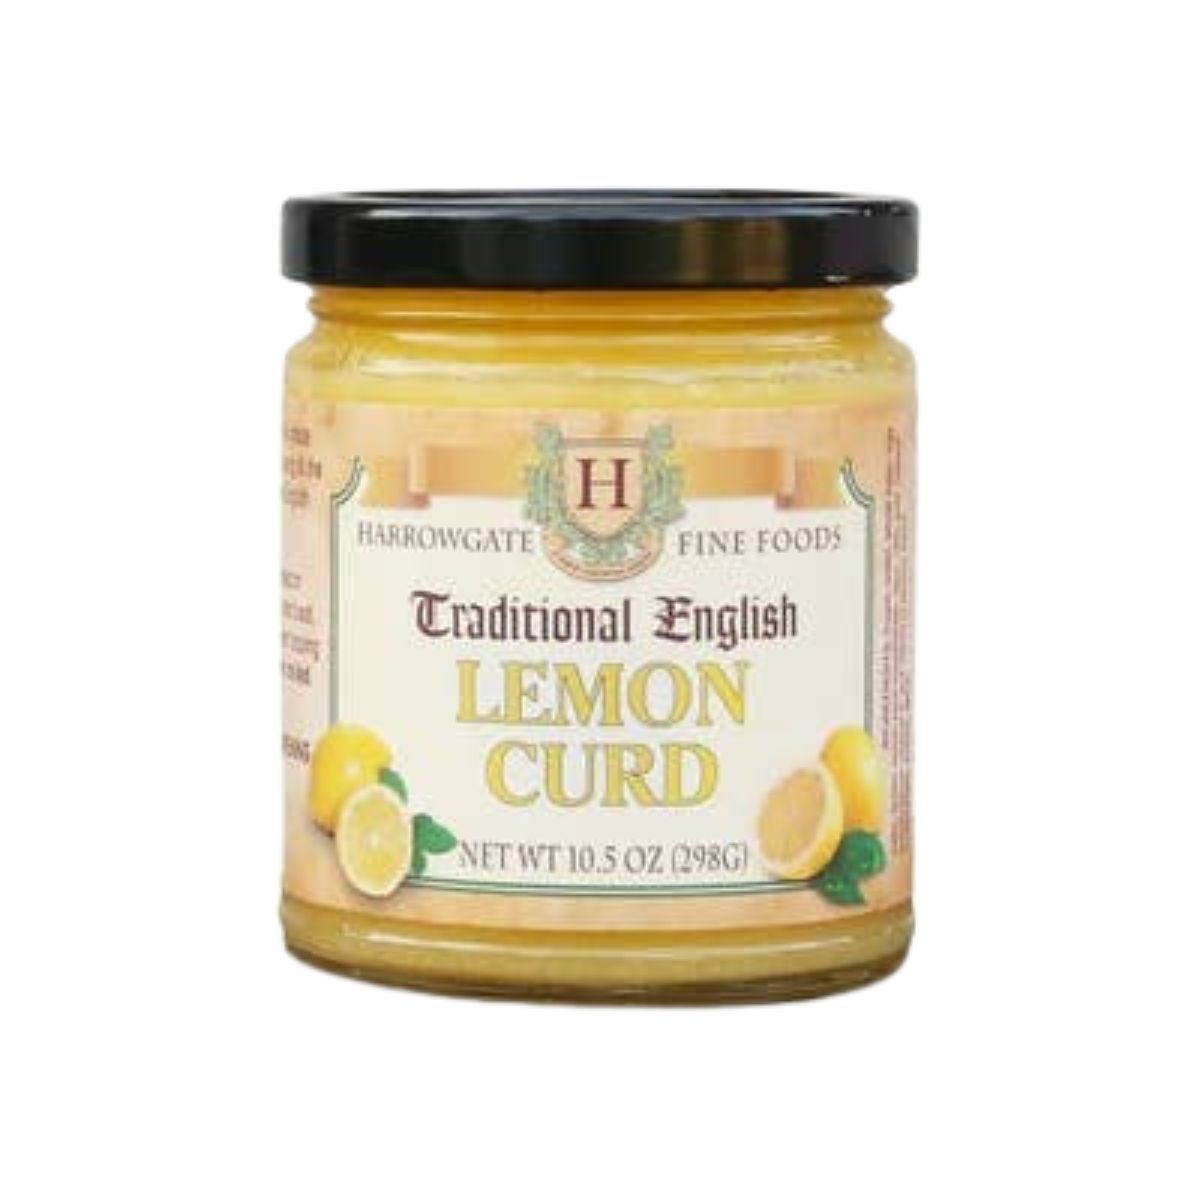 Traditional English Lemon Curd- the perfect dessert topping